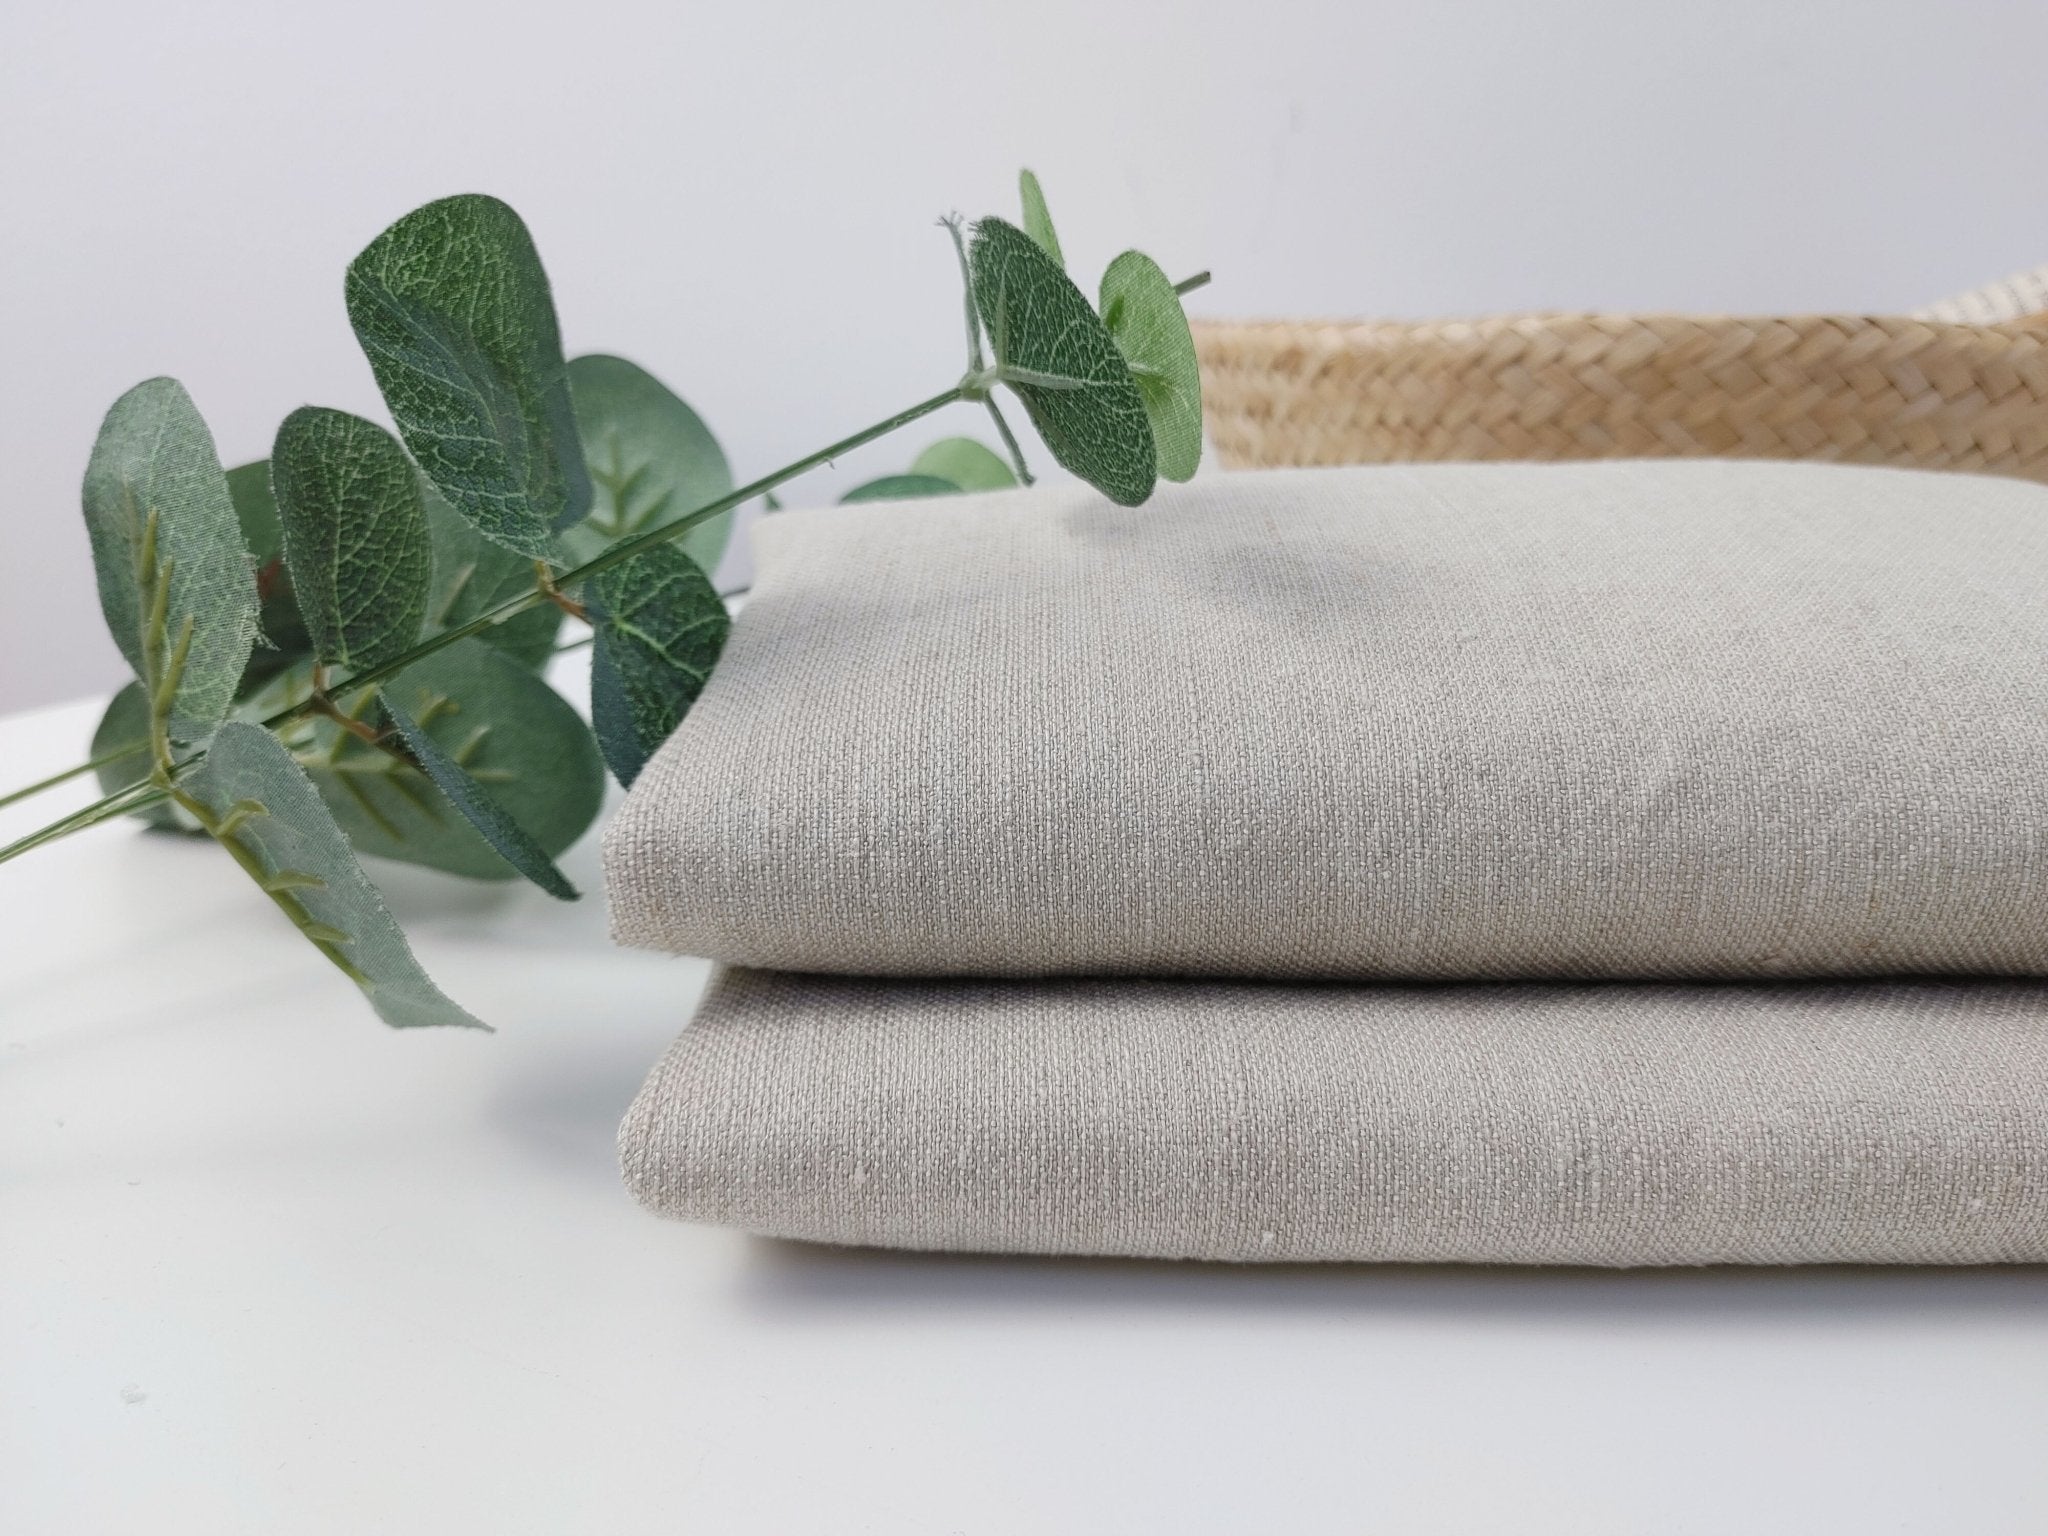 Linen Rayon PU Stretch Dobby Weave Fabric 6643 6644 - The Linen Lab - Natural